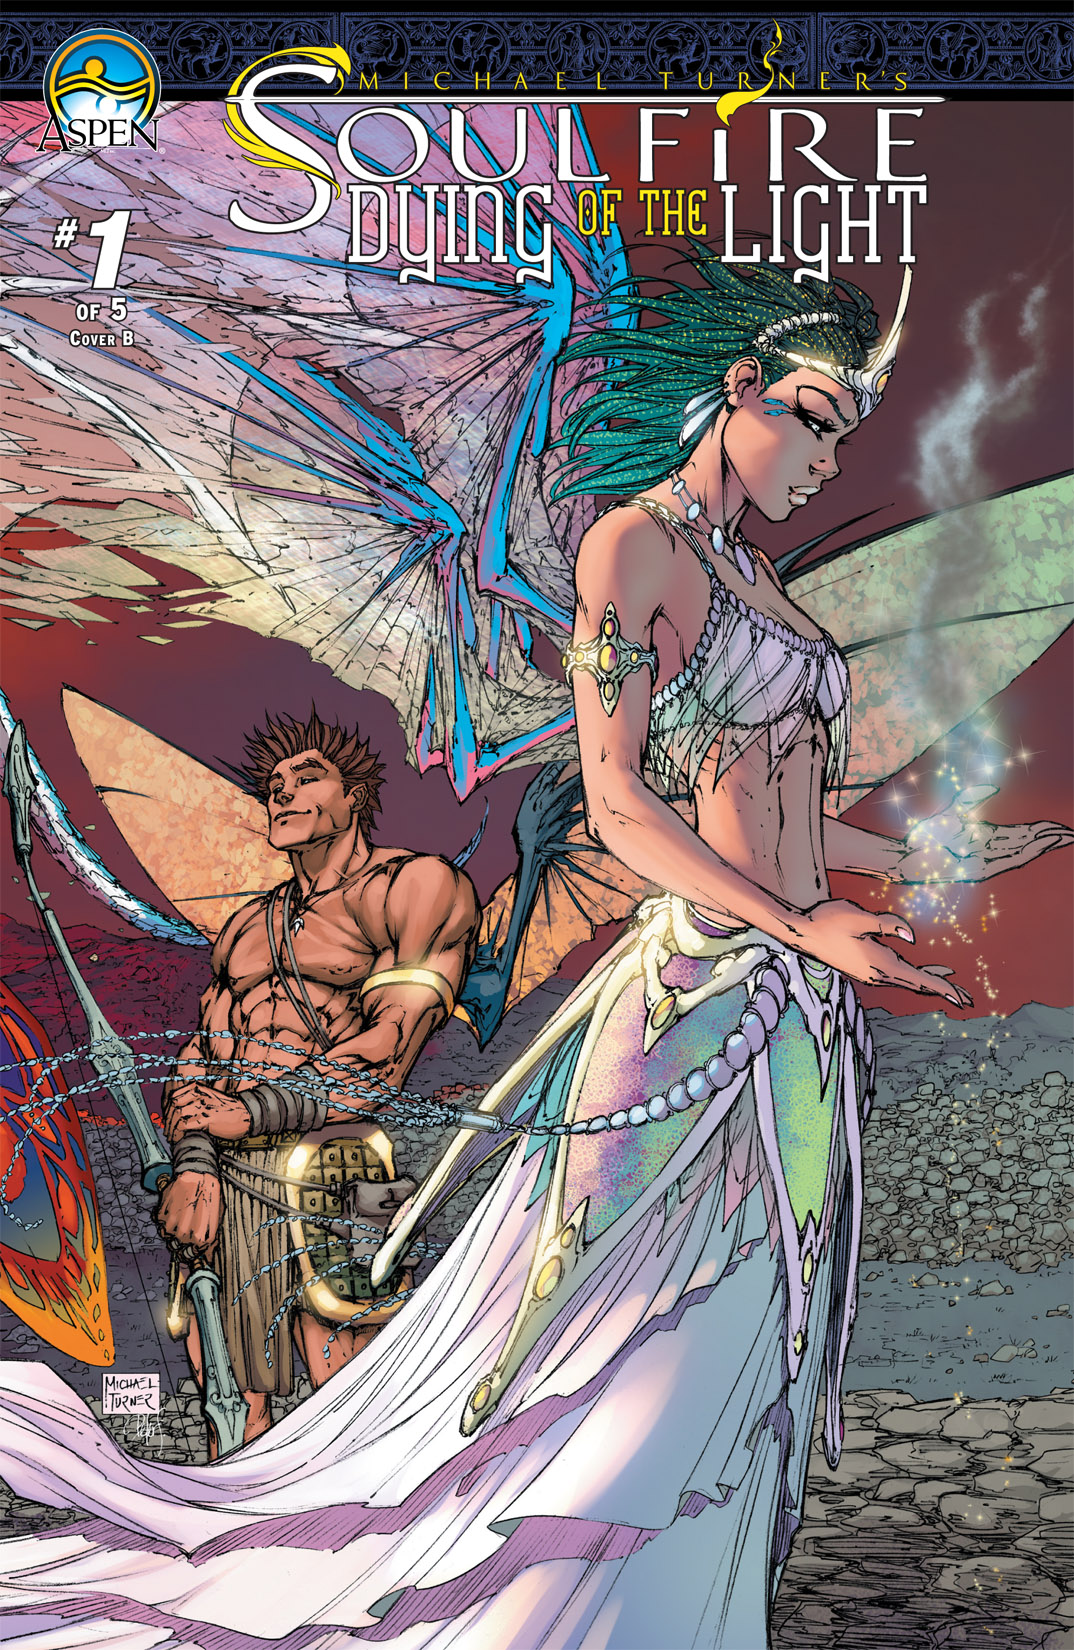 Read online Michael Turner's Soulfire: Dying Of The Light comic -  Issue #1 - 2